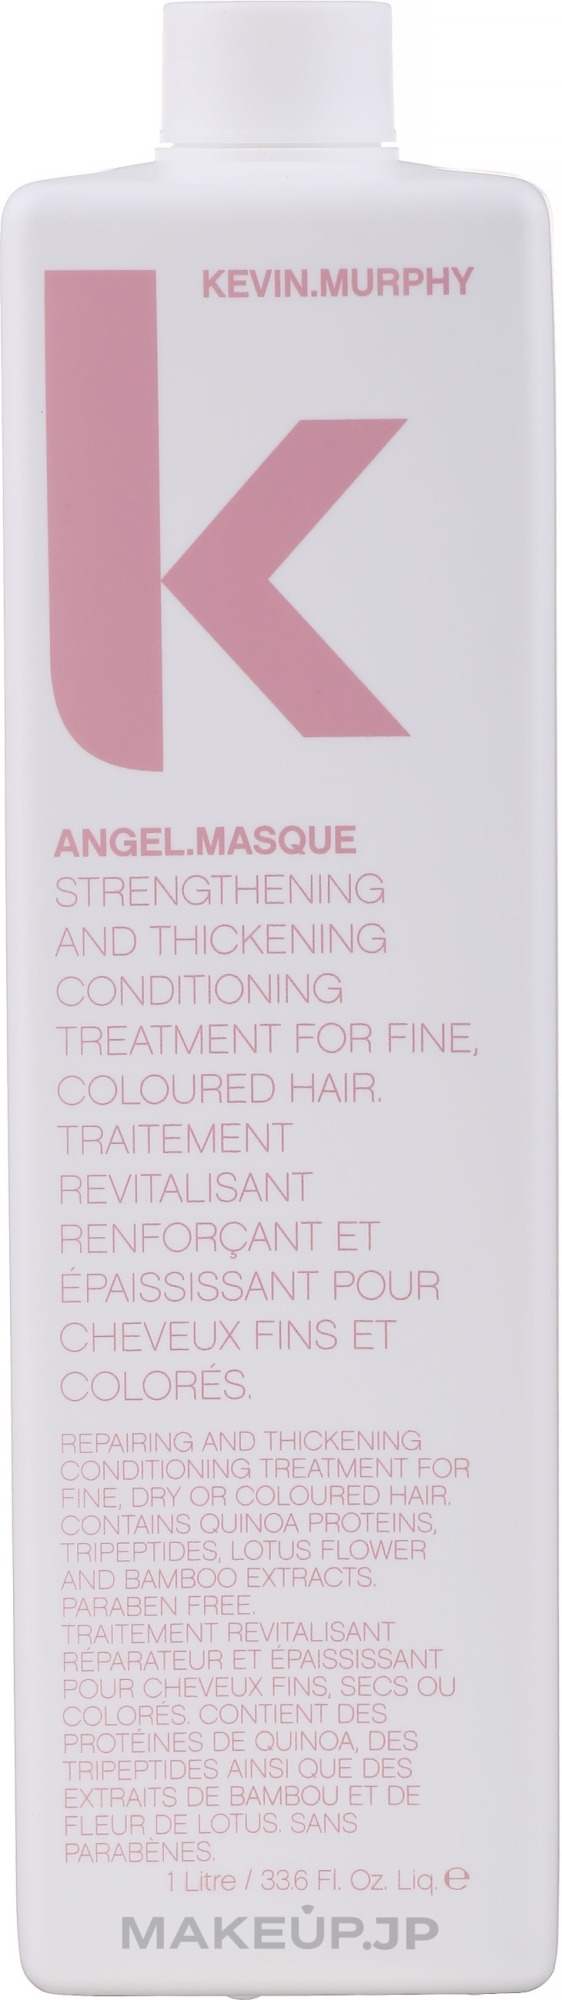 Strengthening Mask for Dry, Thin, Colored Hair - Kevin.Murphy Angel.Masque — photo 1000 ml